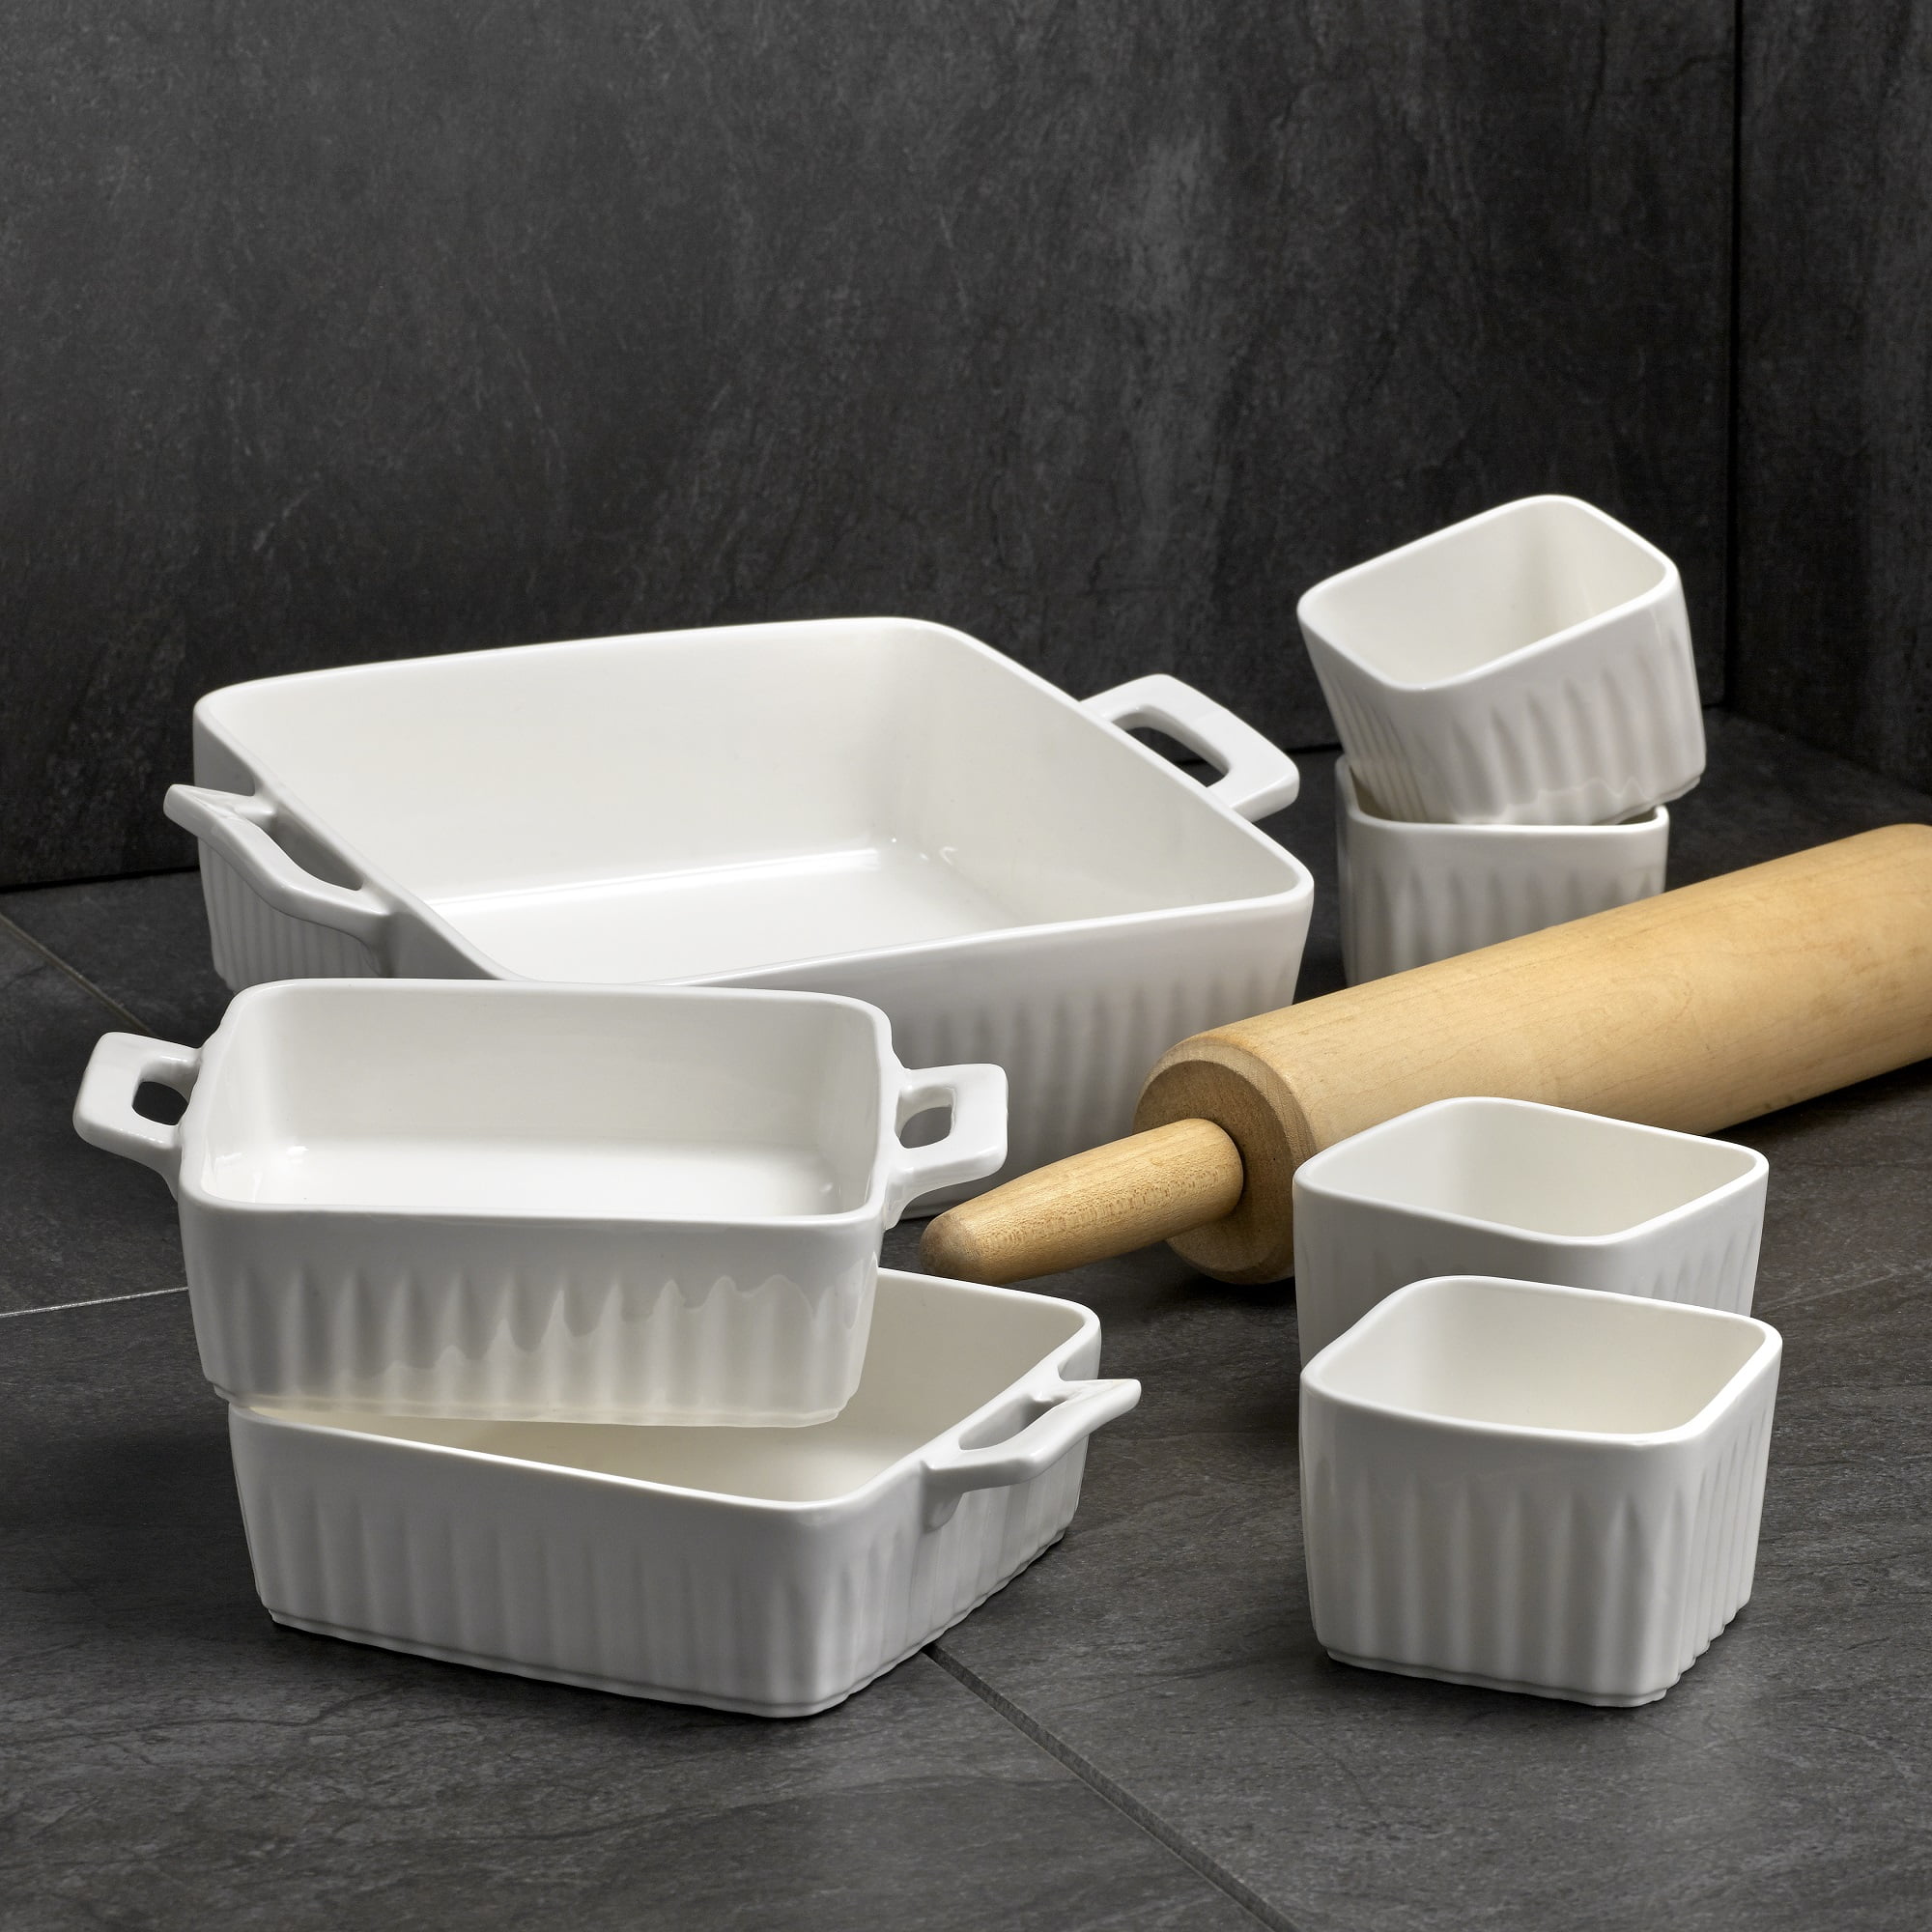 Over and Back Ceramic Baking Set - 7-Piece - Save 44%